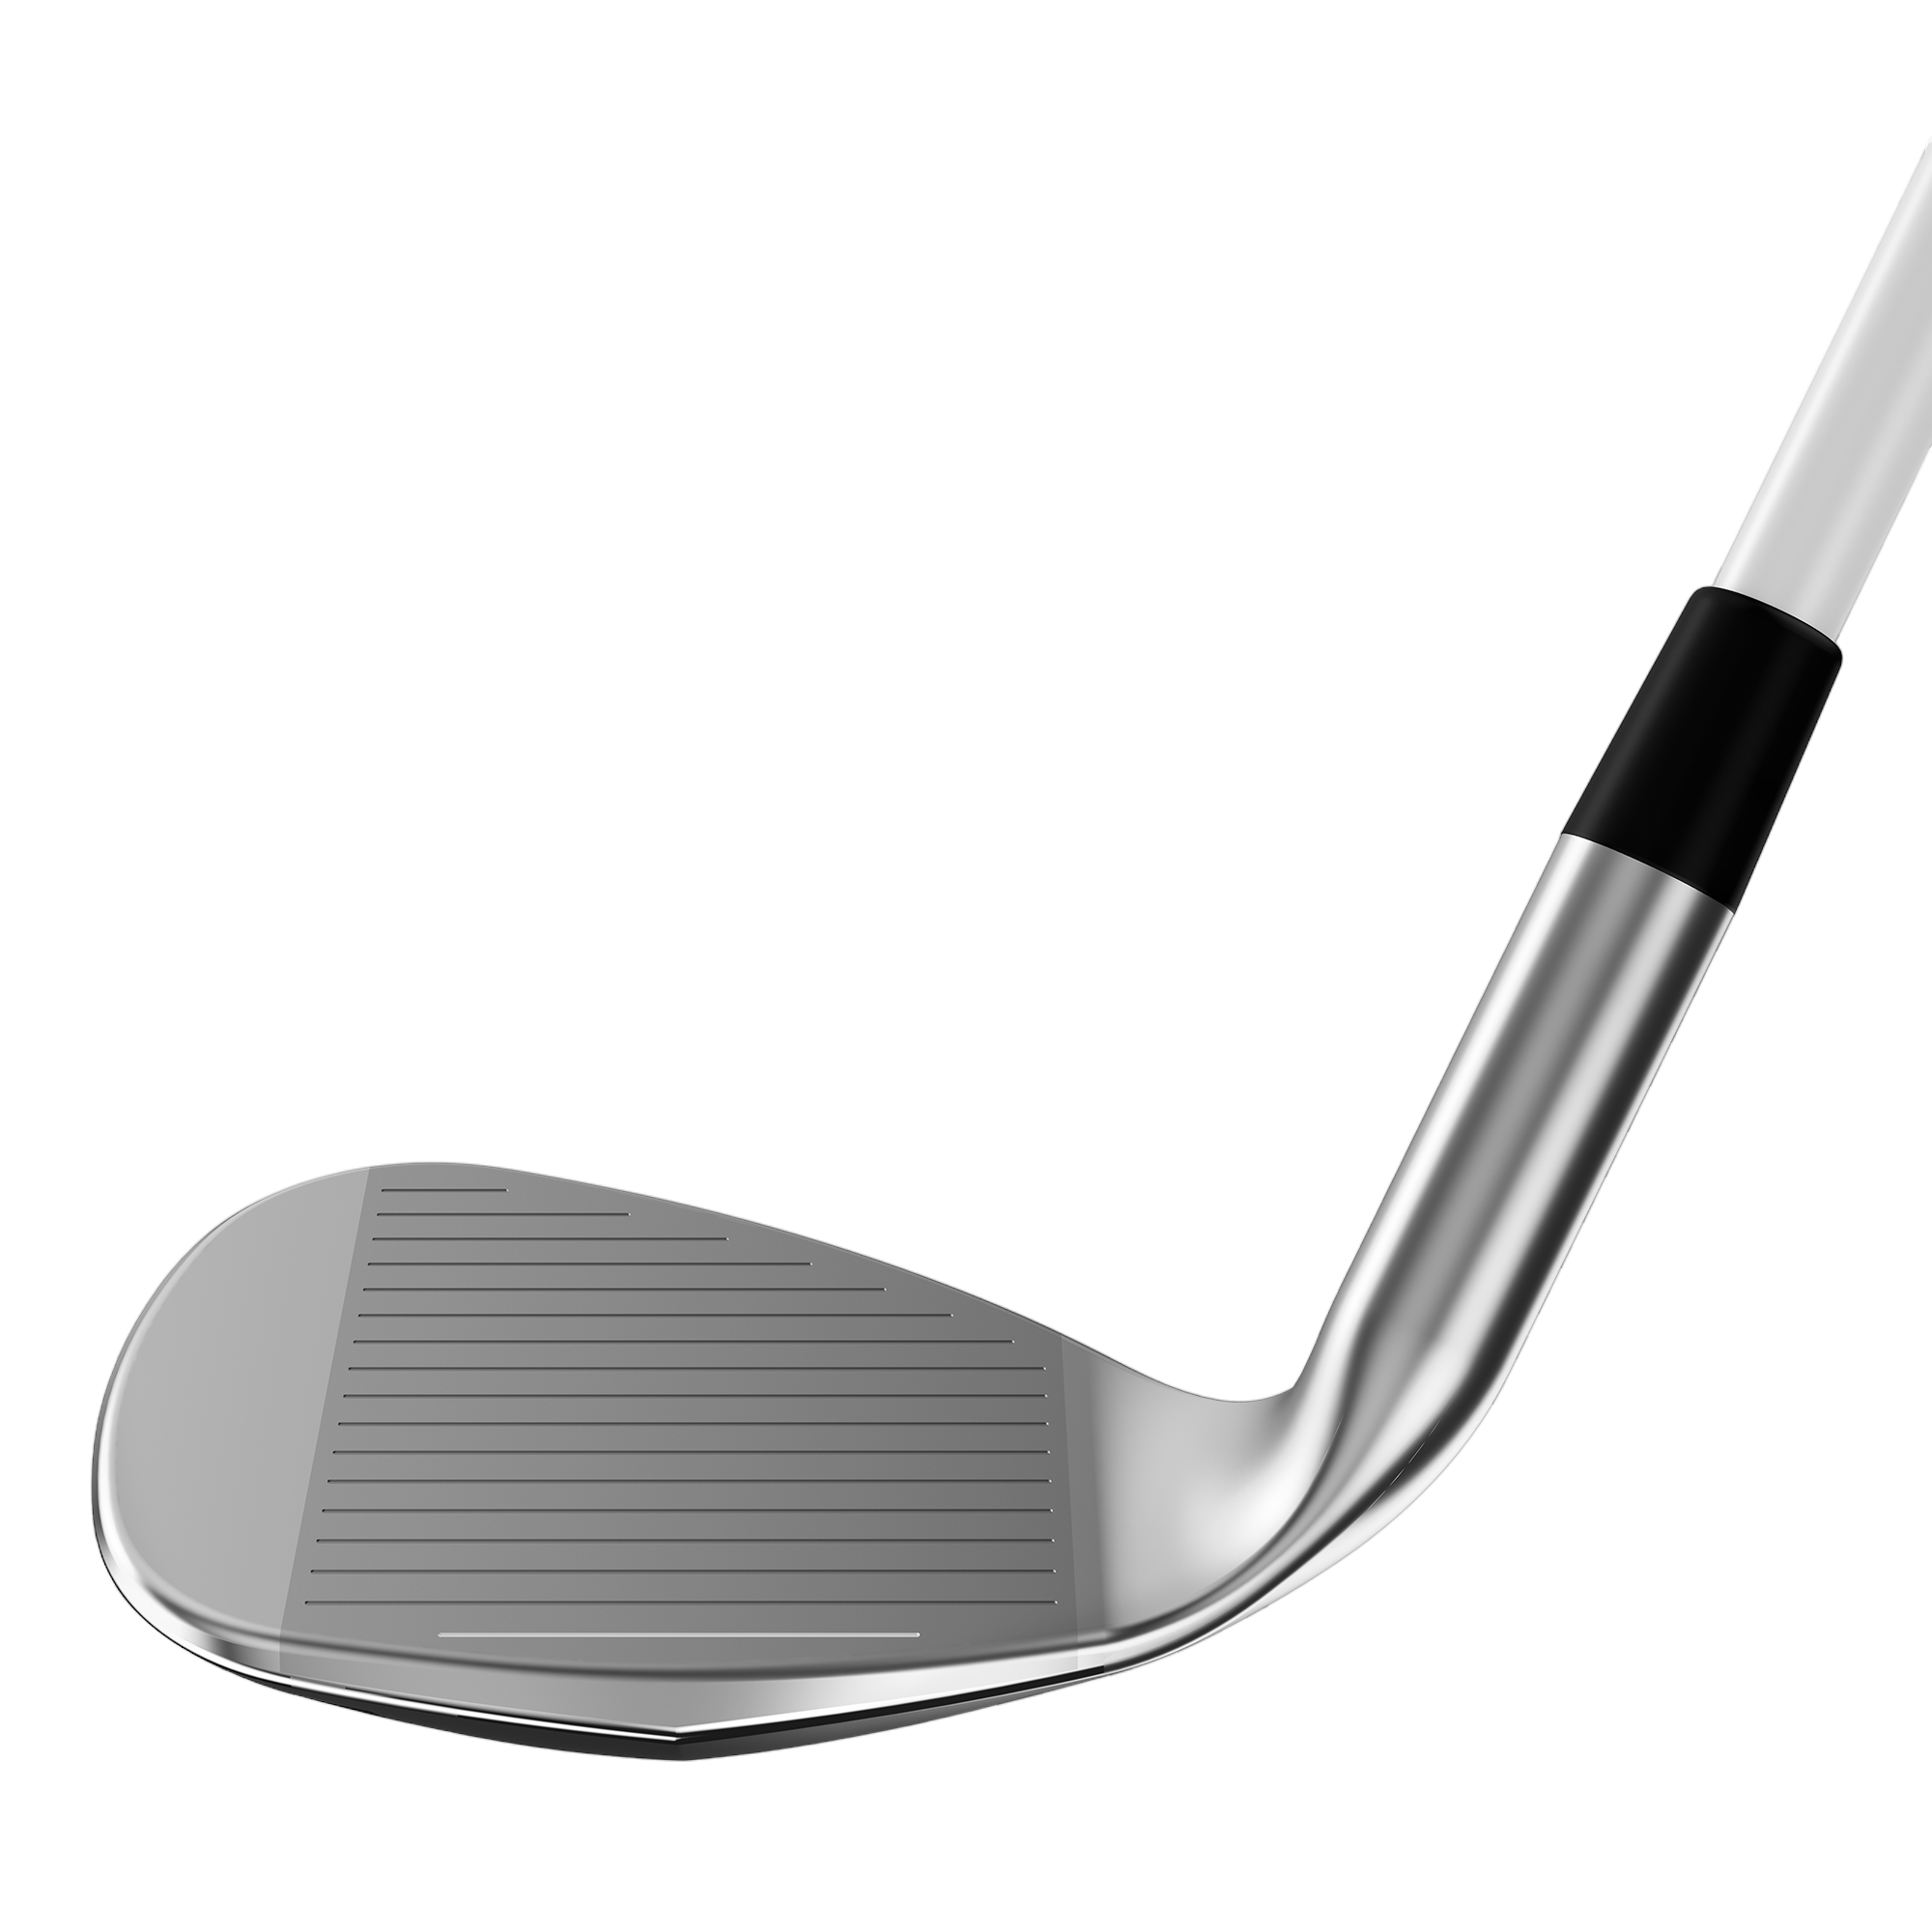 Hot Launch E521 Individual Iron-Woods/Wedges w/ Graphite Shafts